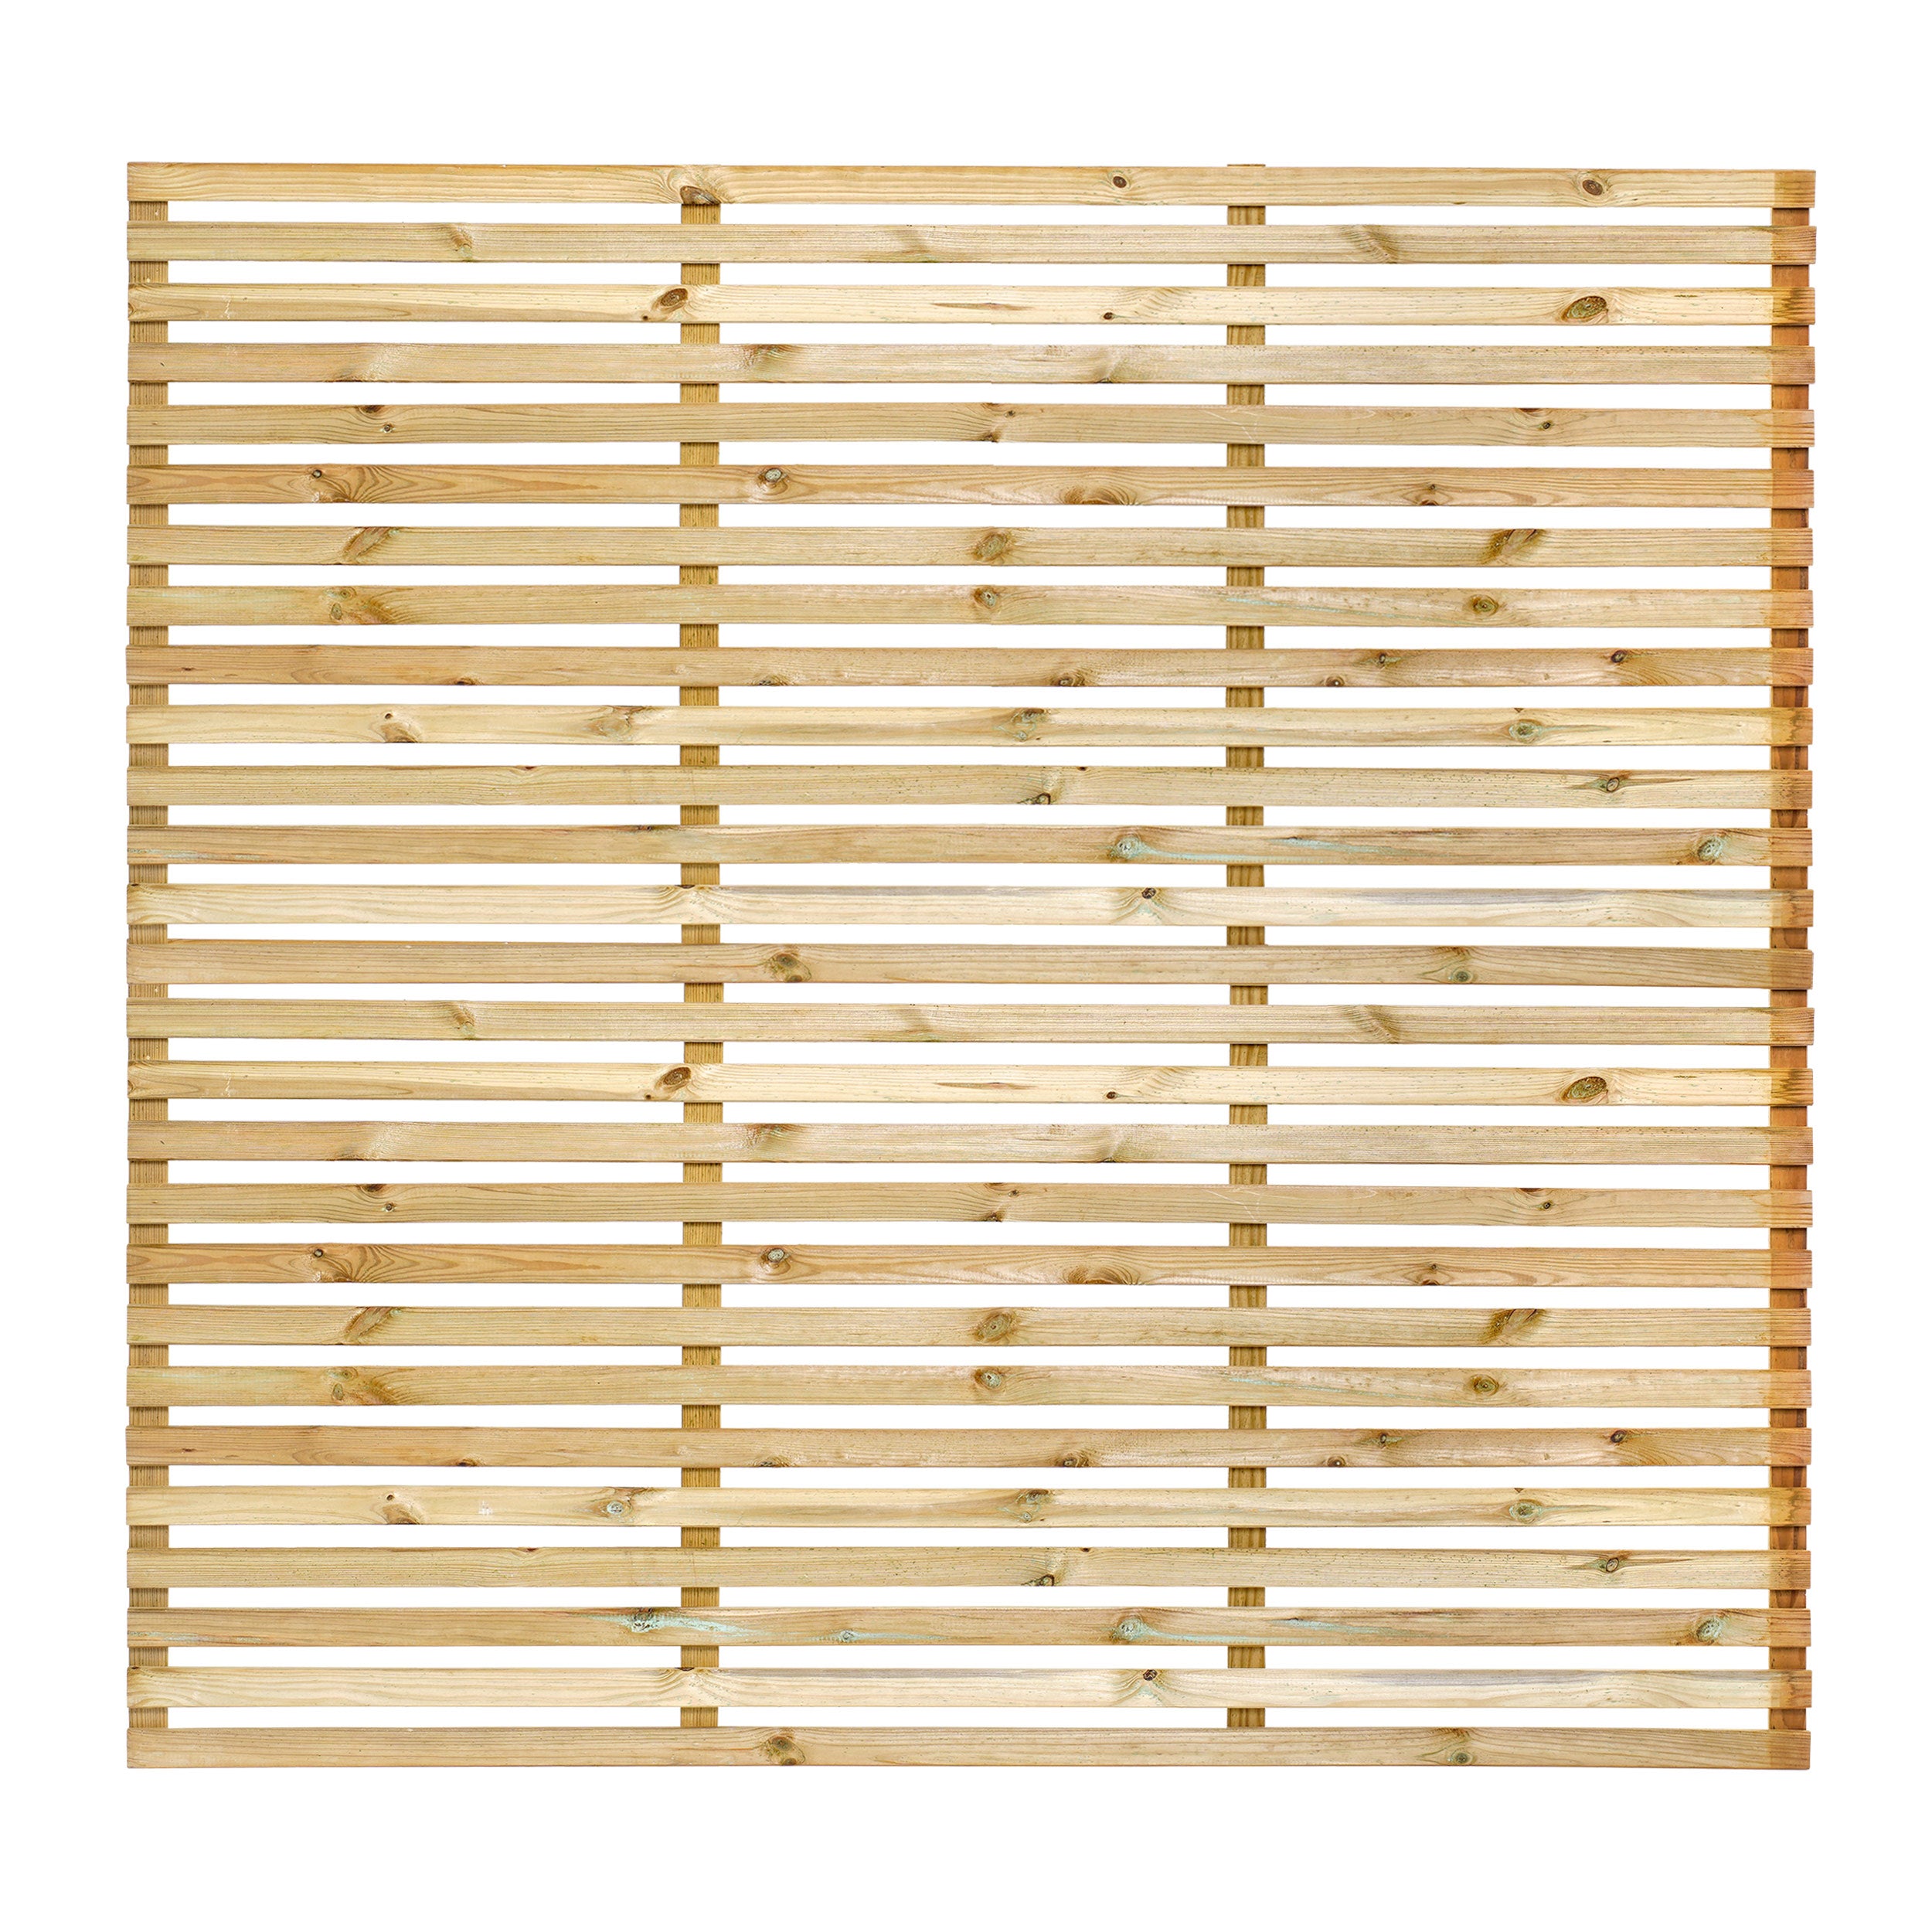 6ft x 6ft Single Slatted Fence Panel - Pressure Treated Green